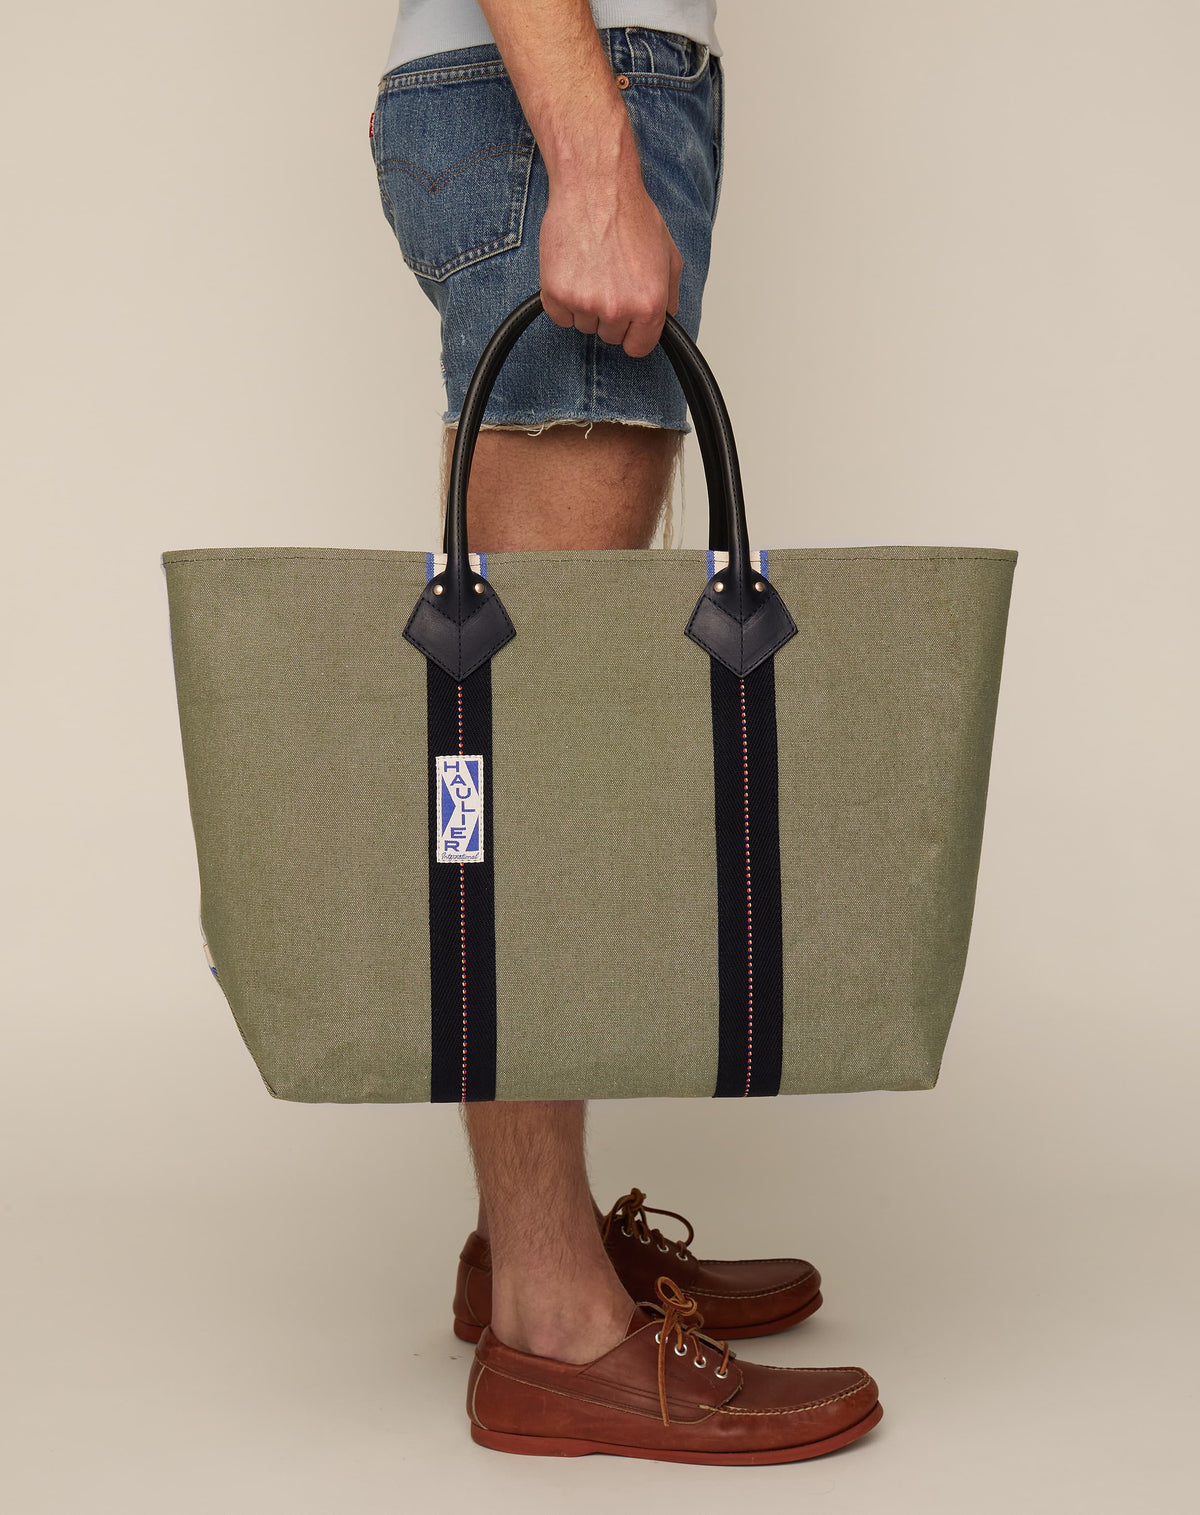 Image of person holding a classic canvas tote bag in sage colour with black leather handles and contrasting black stripes.